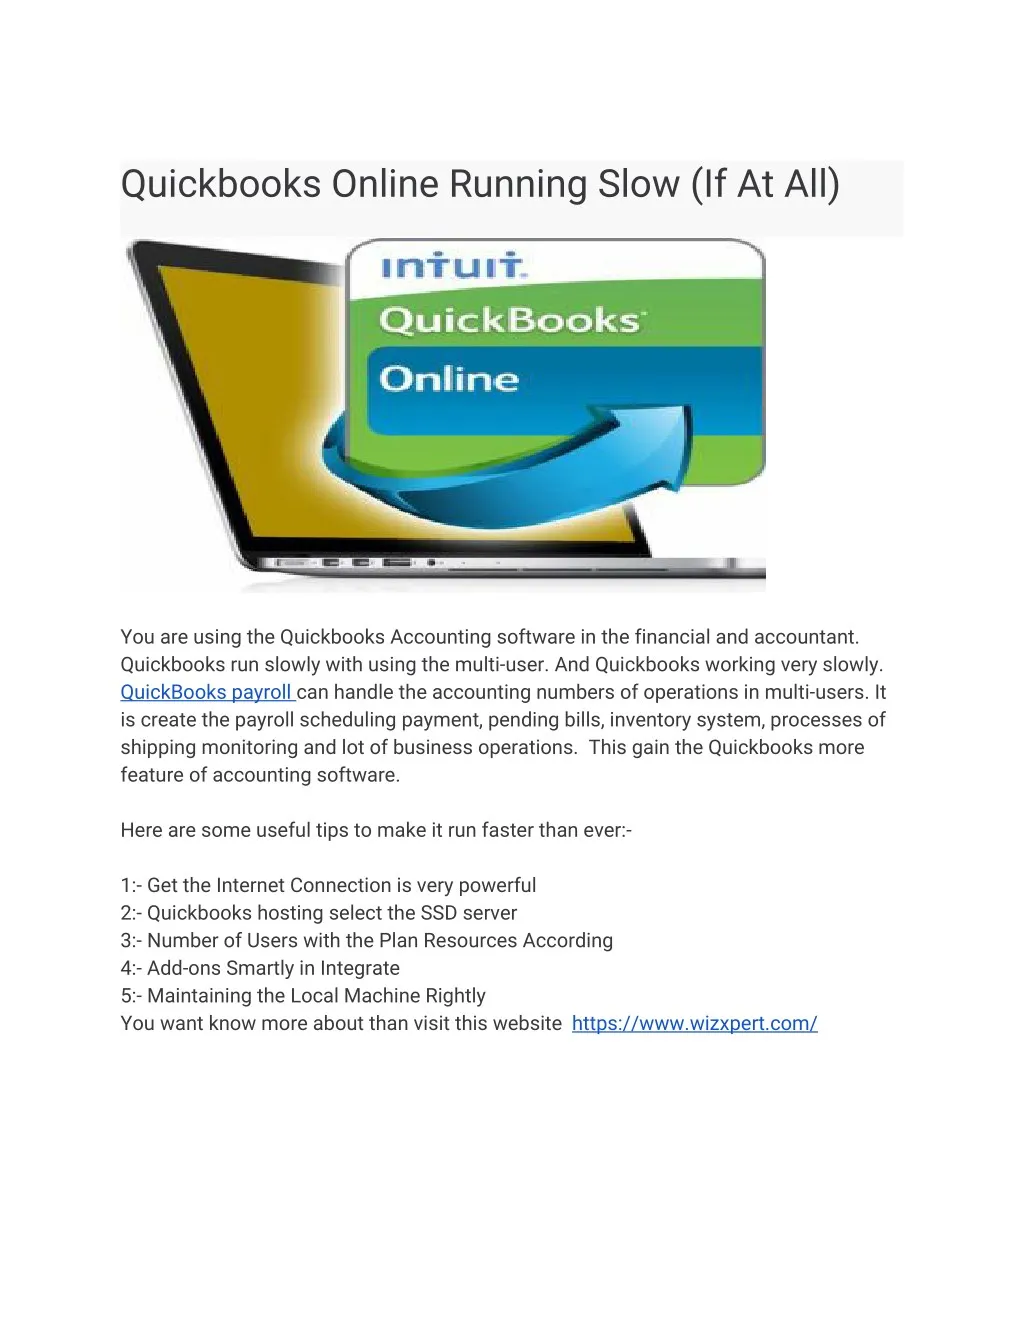 quickbooks online running slow if at all